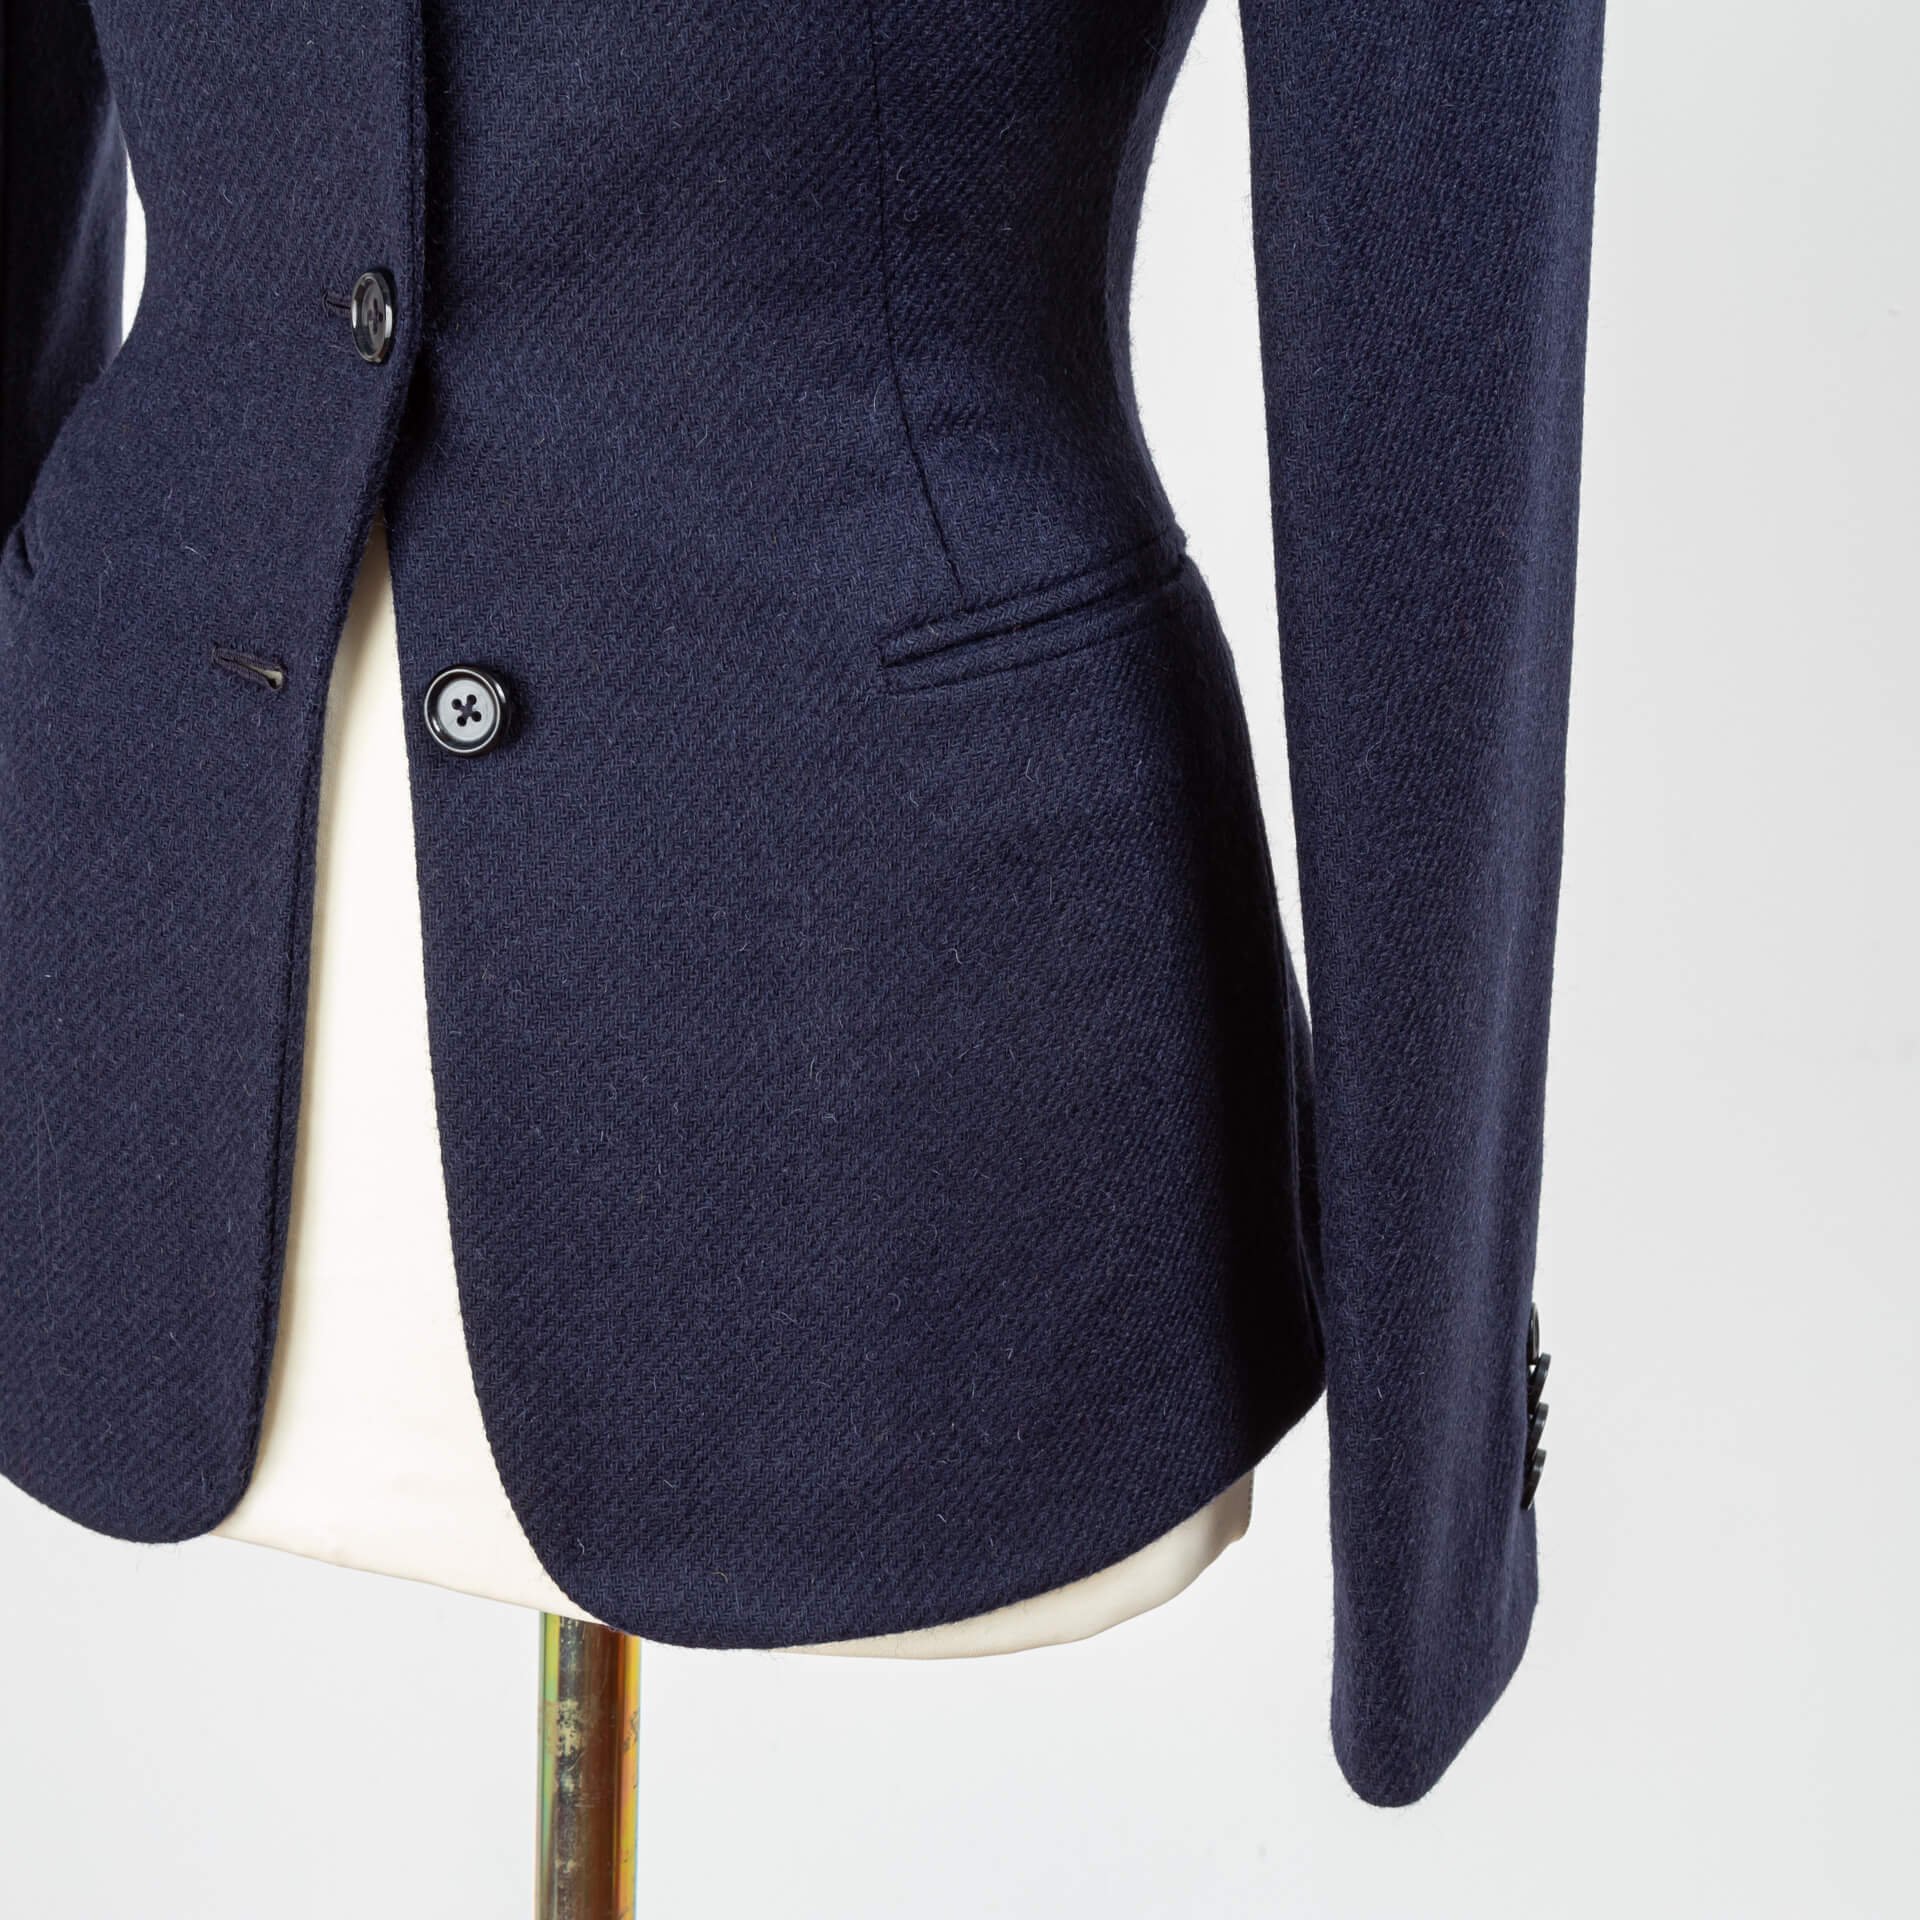 Ladies Jacket with Stand-Up Collar in Navy Tweed